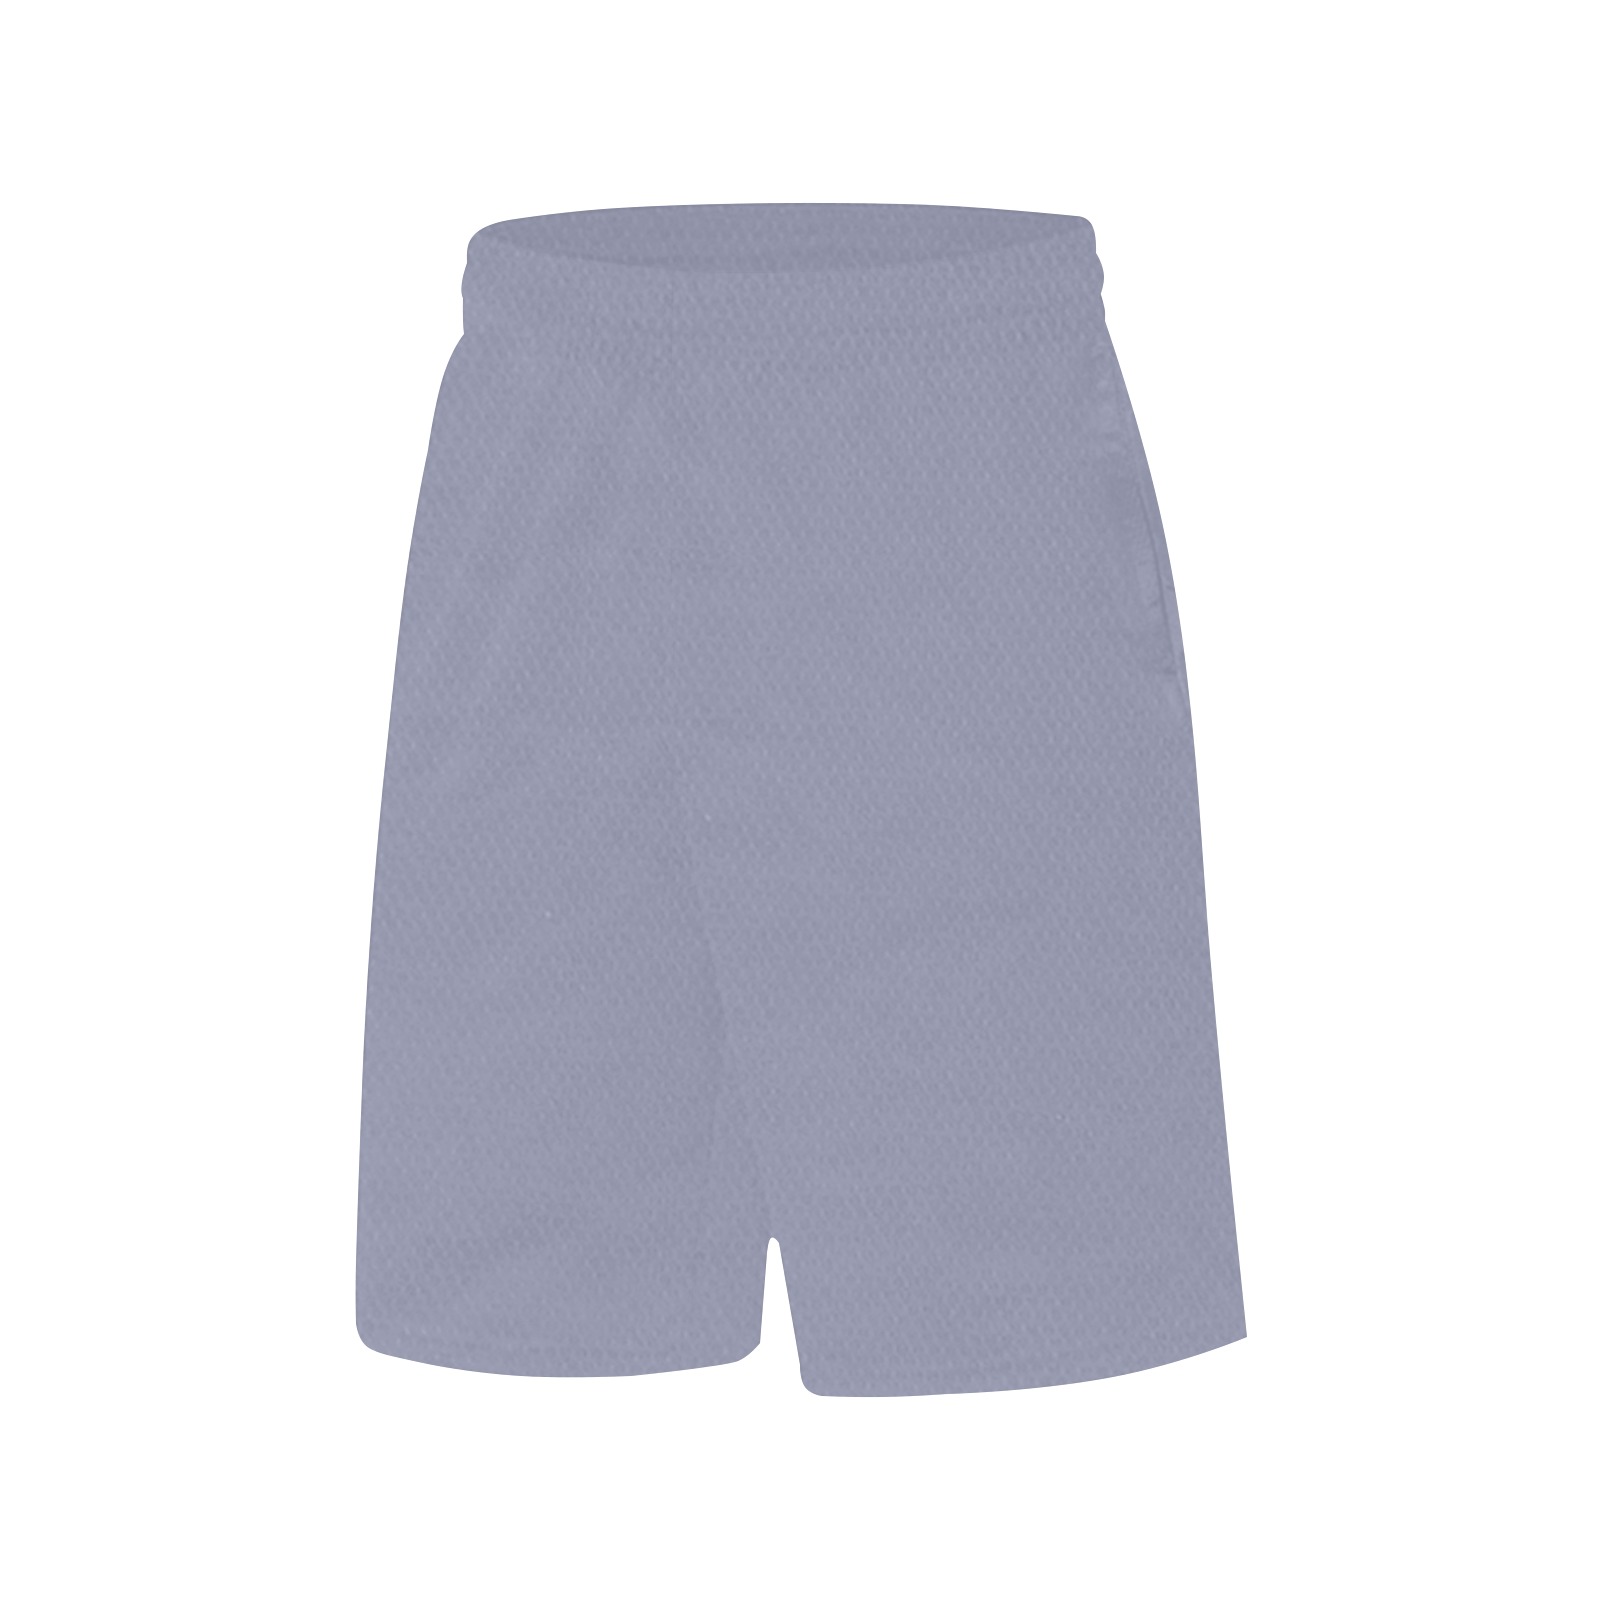 gray All Over Print Basketball Shorts with Pocket